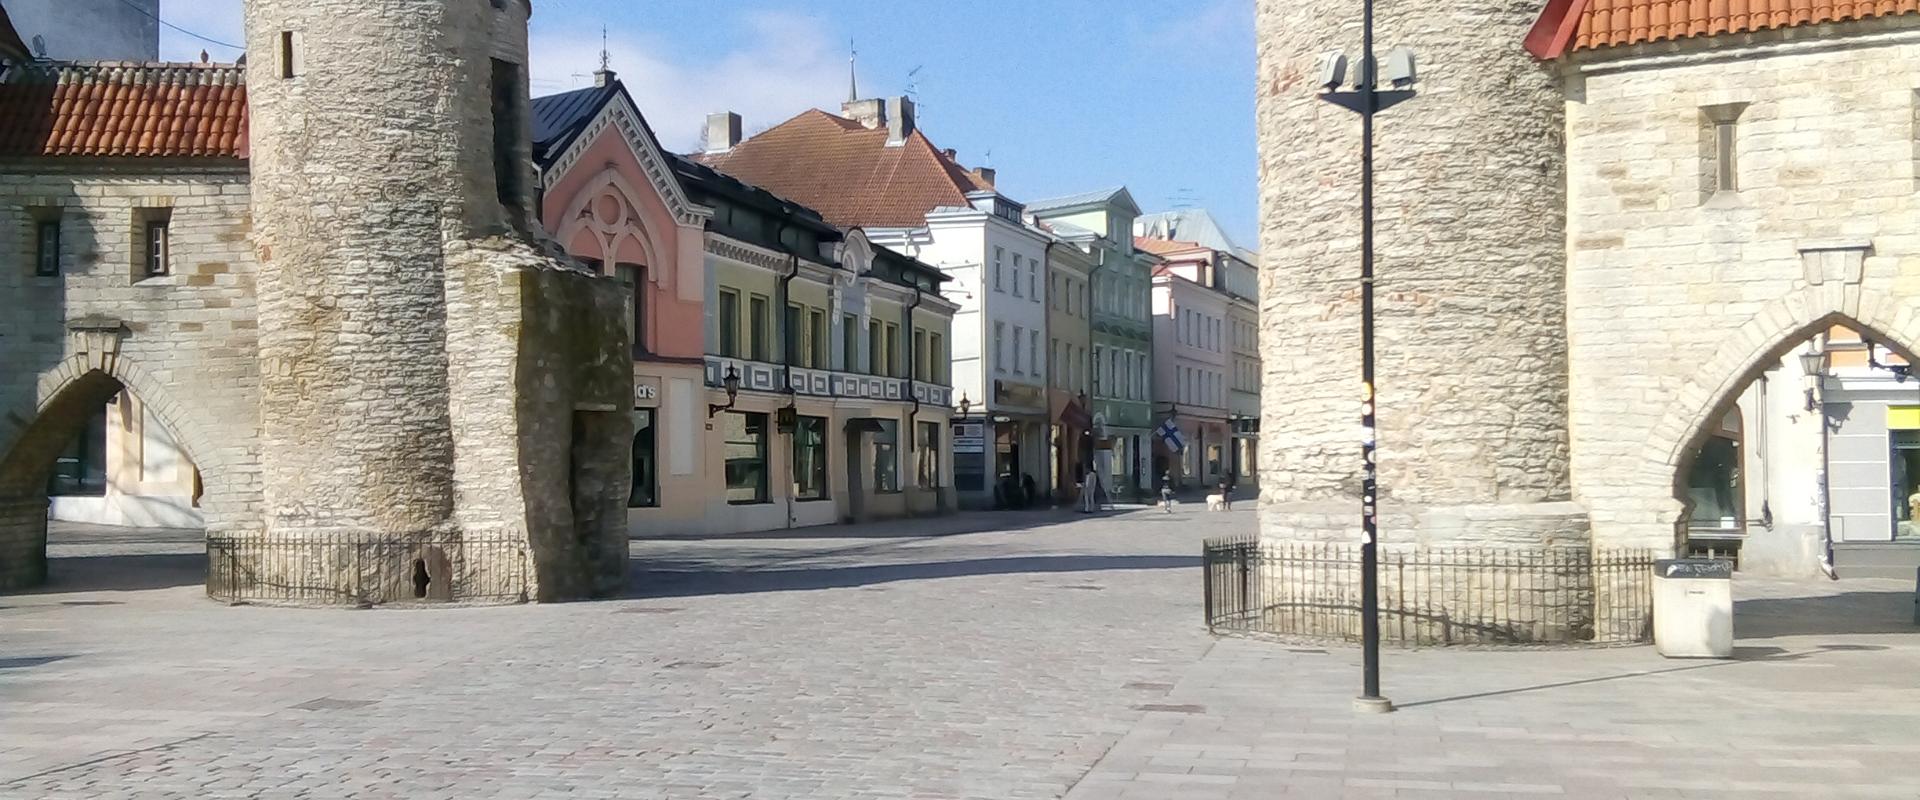 Guided Tour in the Old Town of Tallinn